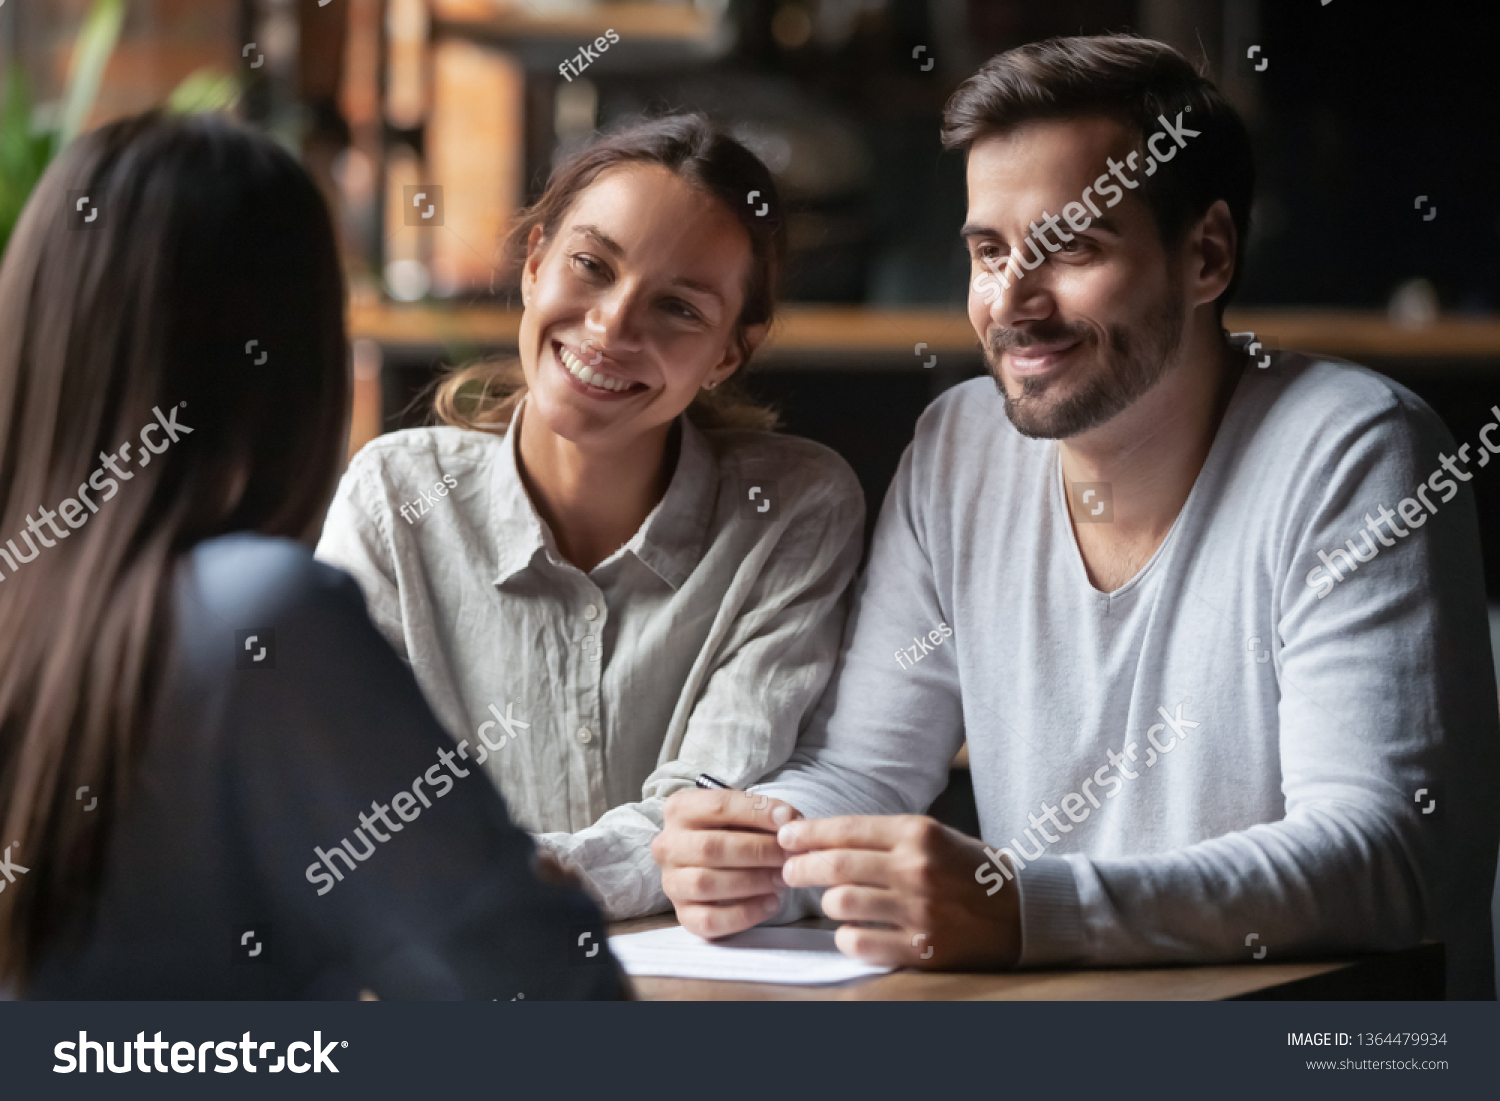 Biracial woman caucasian man listen vacancy candidate sitting together at table at job interview. Diverse couple communicating with real estate agent, successful meeting ready to sign contract concept #1364479934